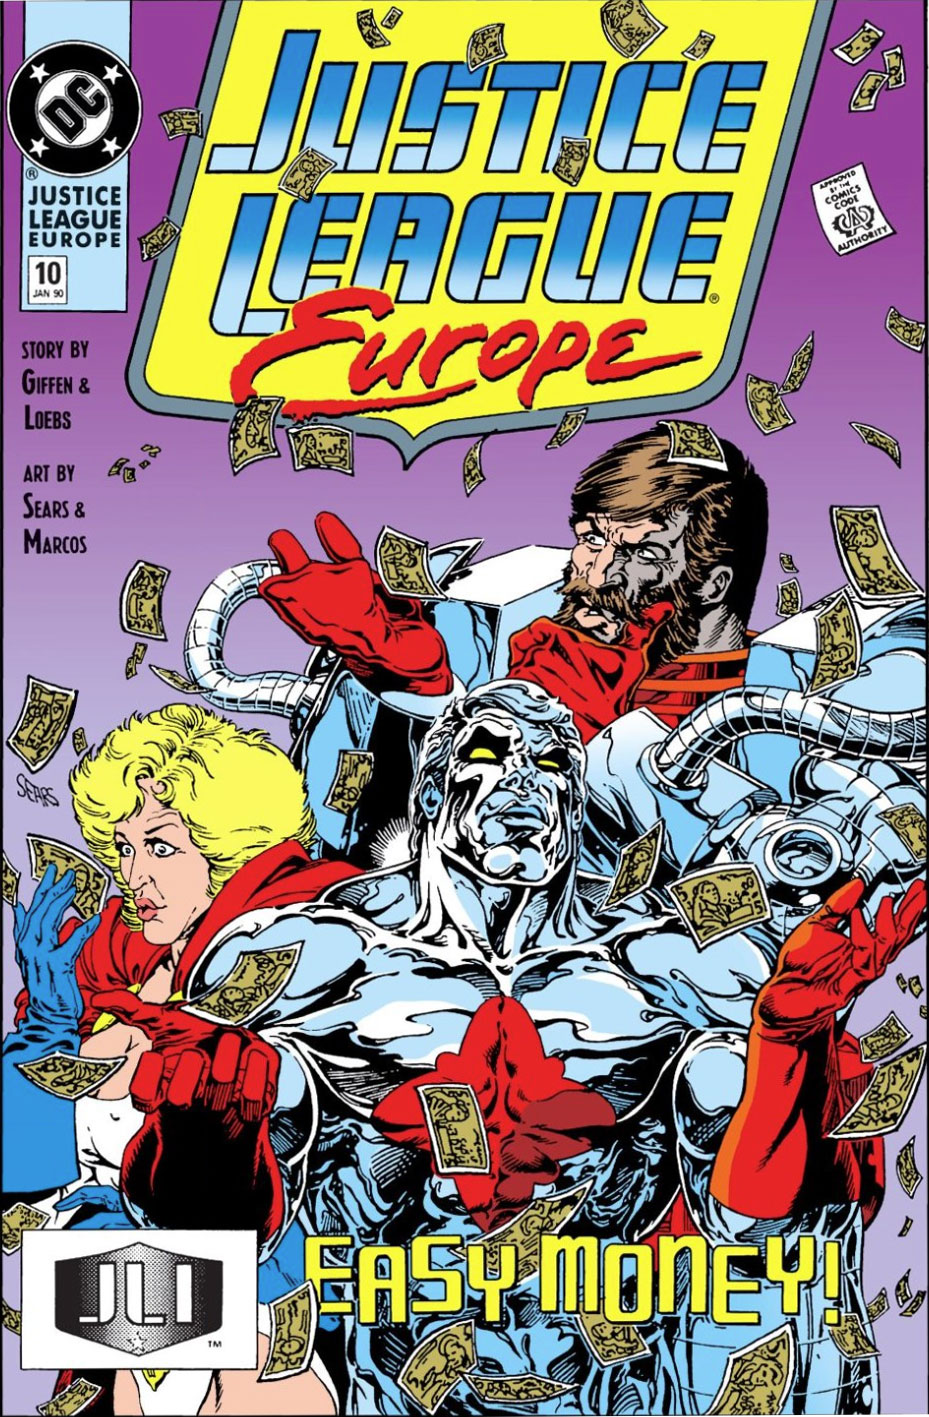 Justice League Europe #10 by Keith Giffen, William Messner-Loebs, Bart Sears and Pablo Marcos